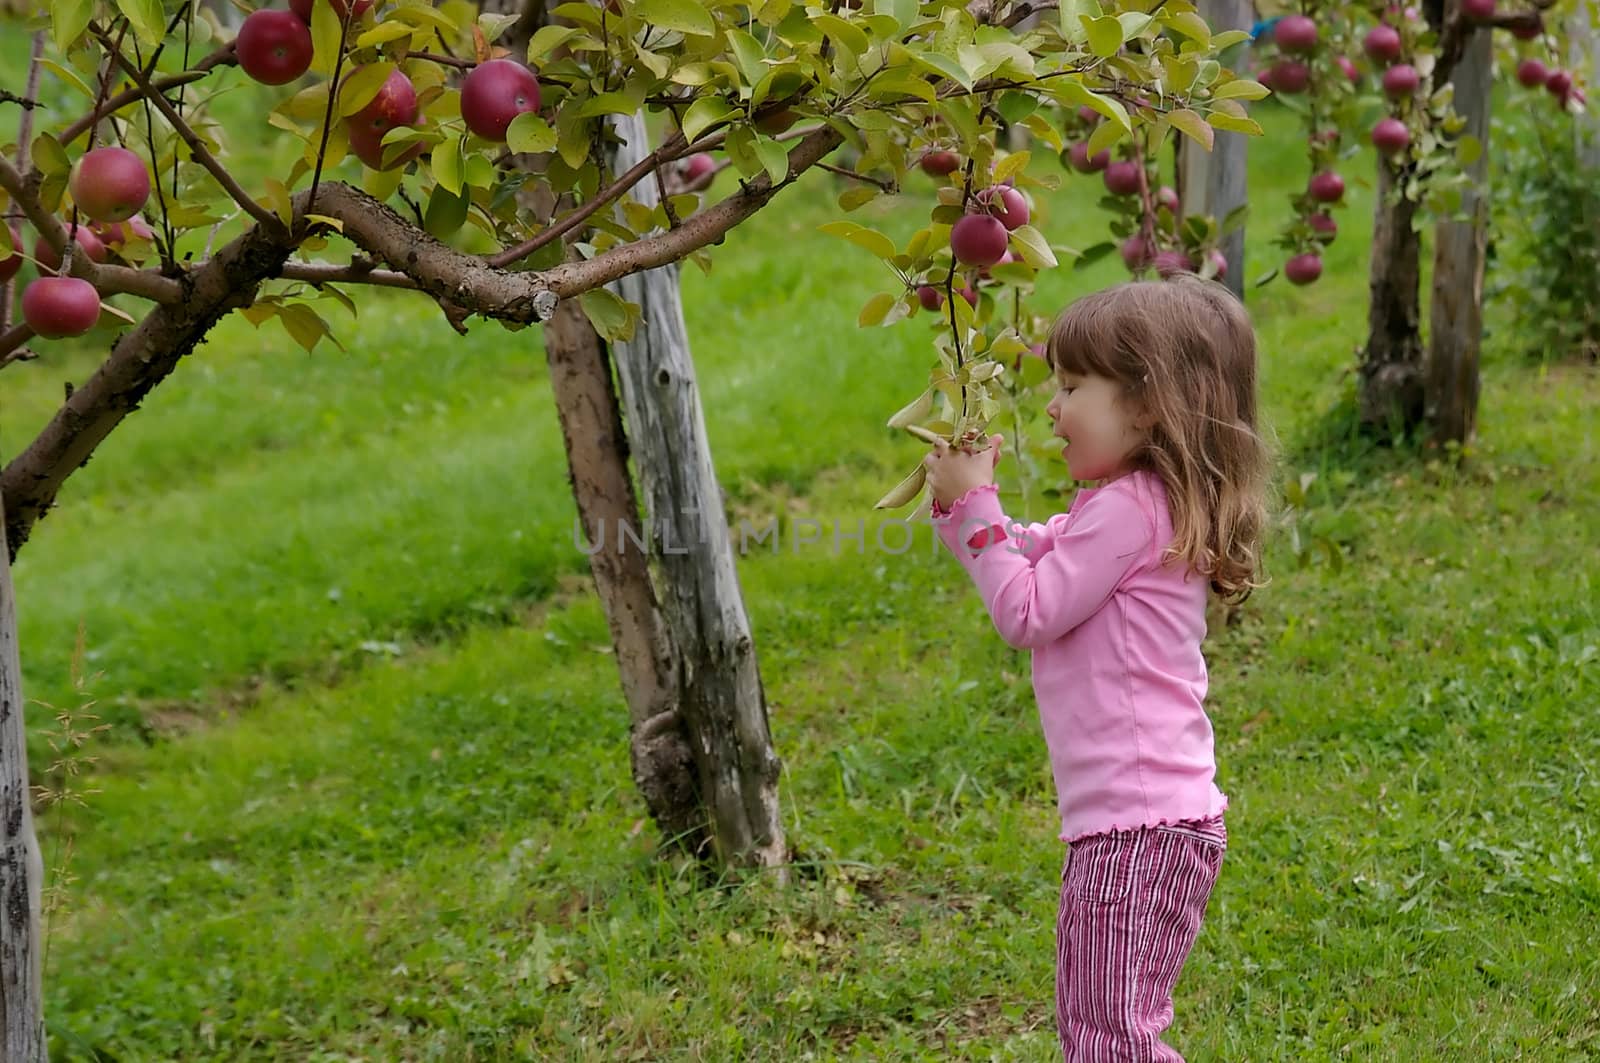 Picking apples by Talanis